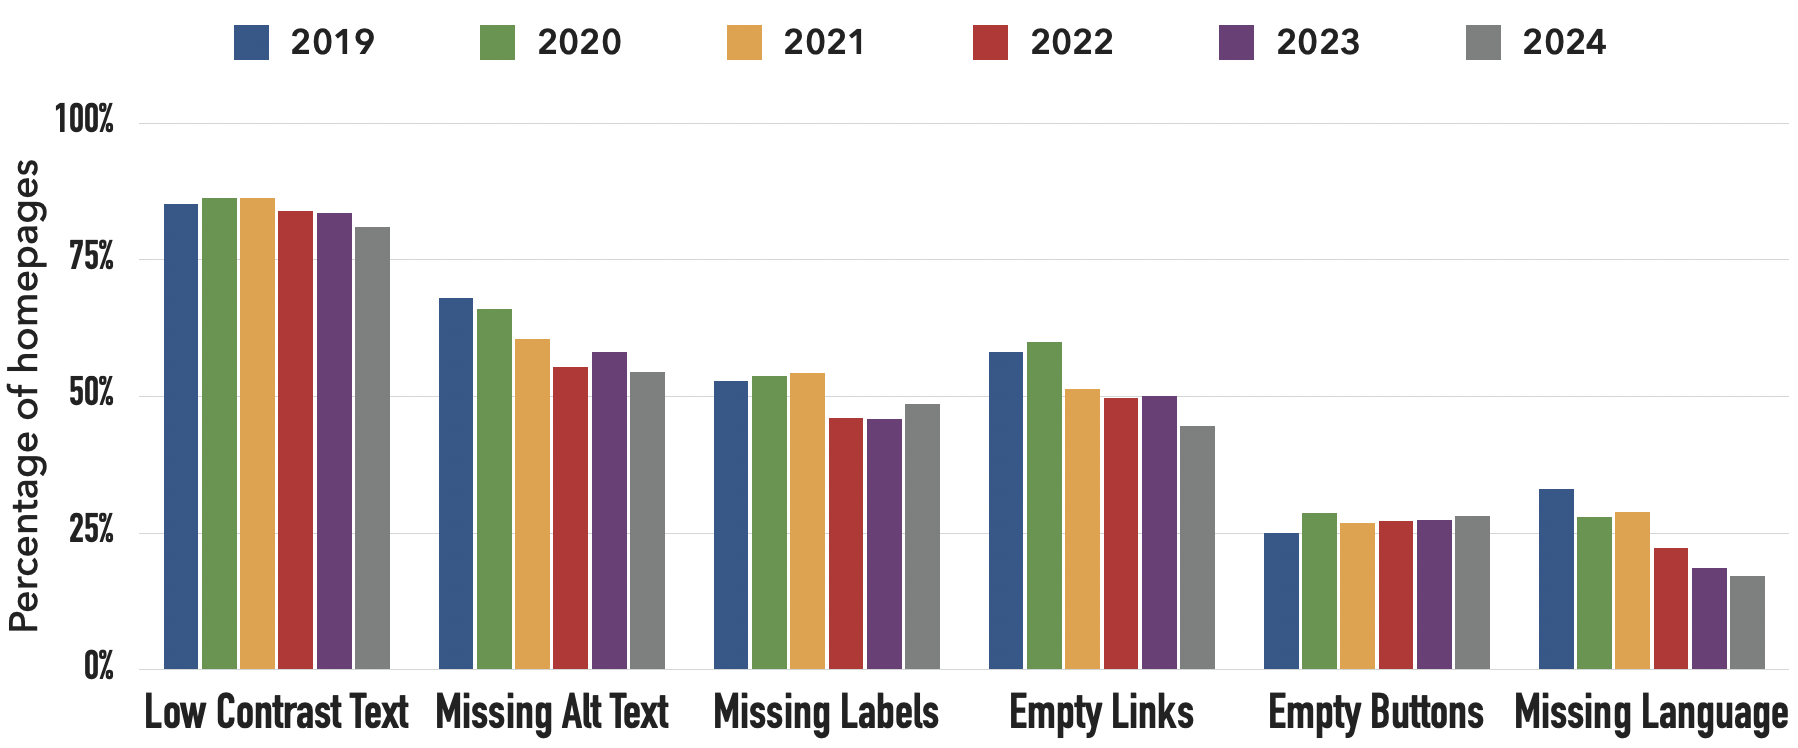 Bar chart showing percentage of homepages with each error type from 2019 to 2024. Low contrast text was on 85% of pages in 2019, increasing to 86%, then decreasing to 81% in 2024. Missing alt text has generally declined from 68% to 54% of home pages. Empty links have similarly decreased from 58% to 45%. Missing labels were at 53% from 2019 to 2021, then 46% increasing to 49% from 2022 to 2024. Empty buttons have slowly increased from 25% to 28%. And missing language has steadily decreased from 33% to 17%.